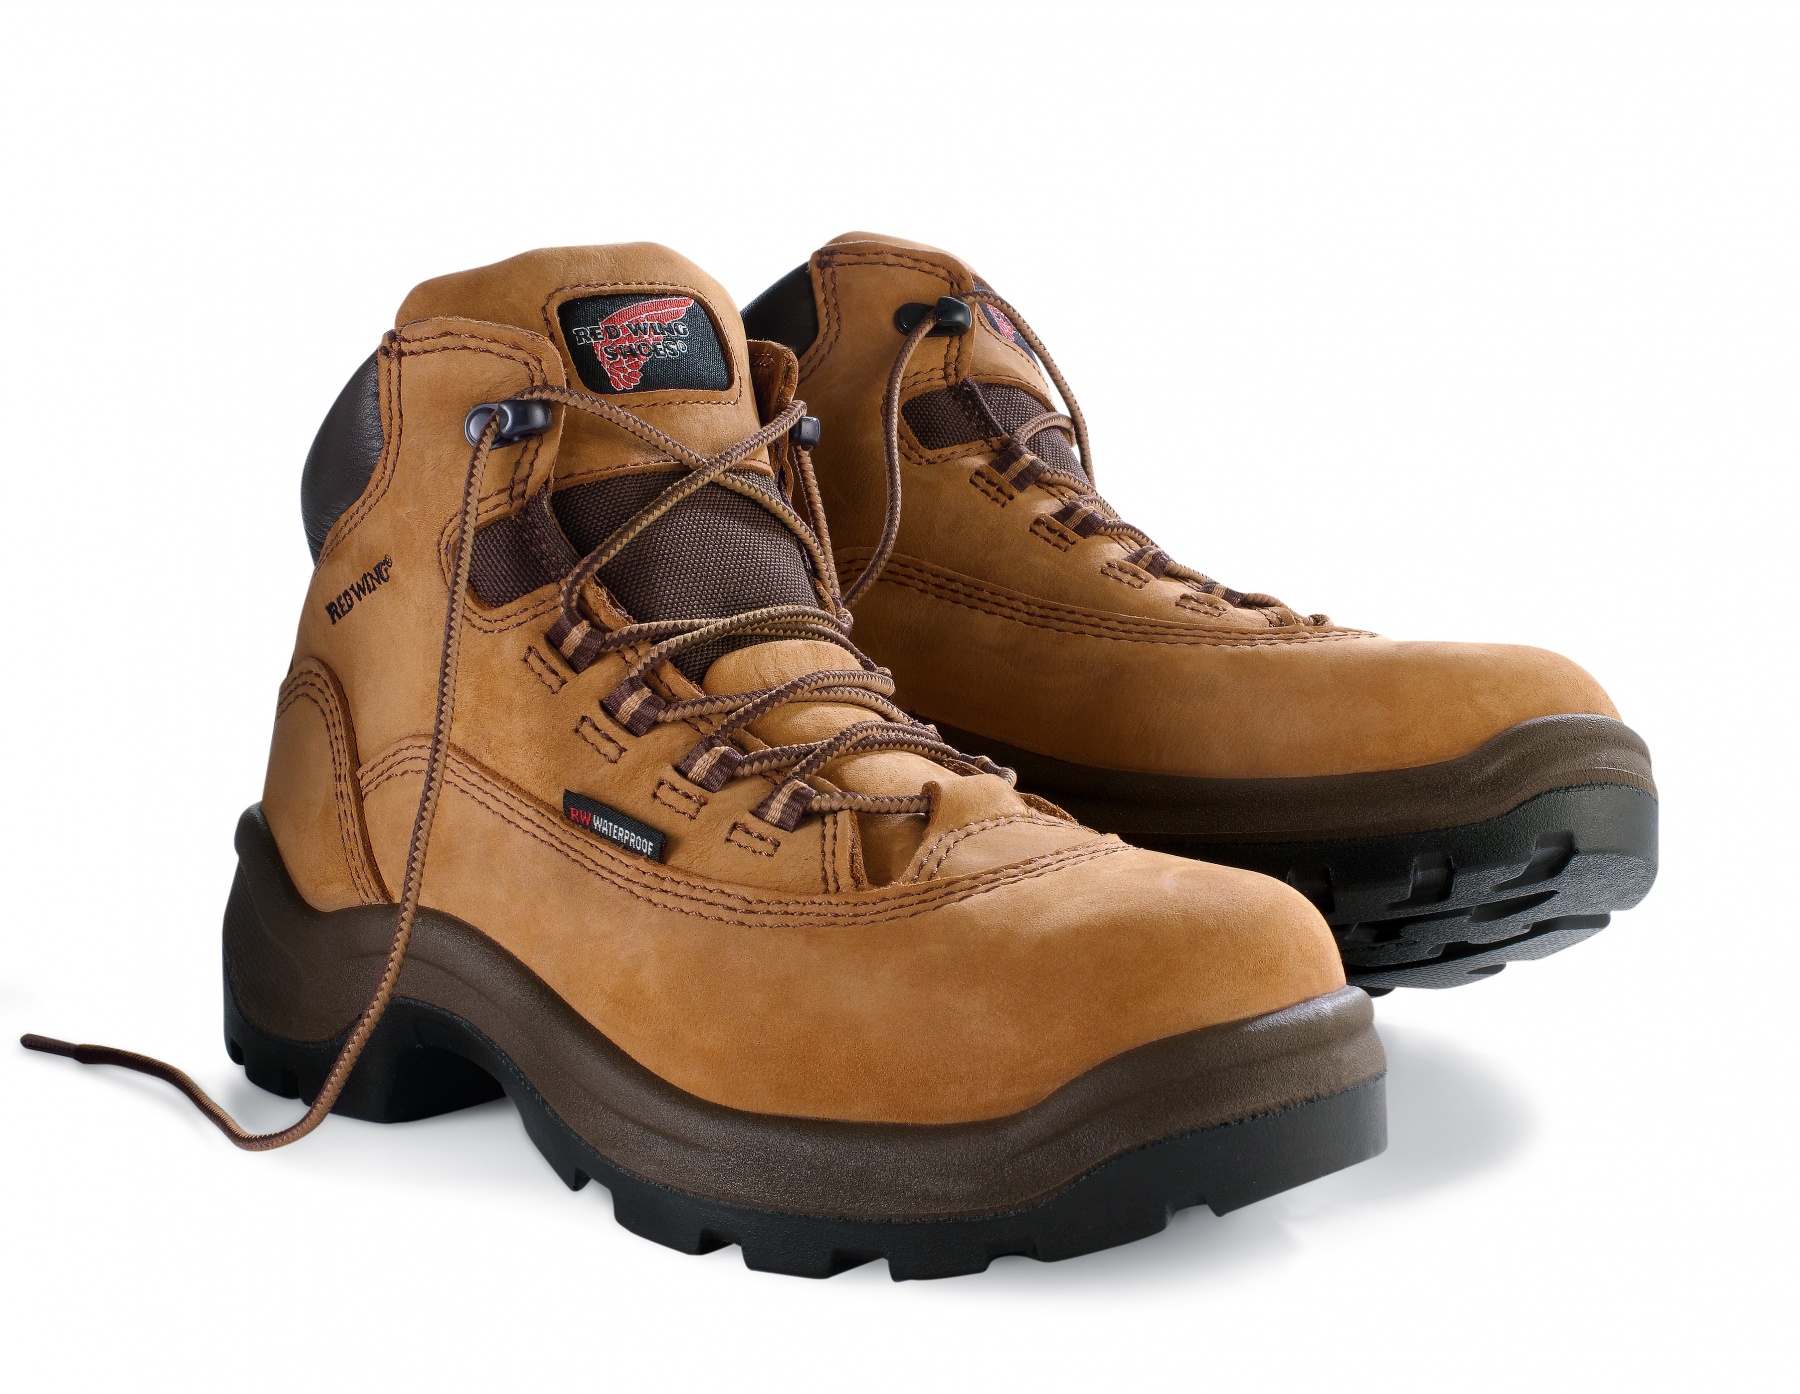 red wing safety shoes for ladies